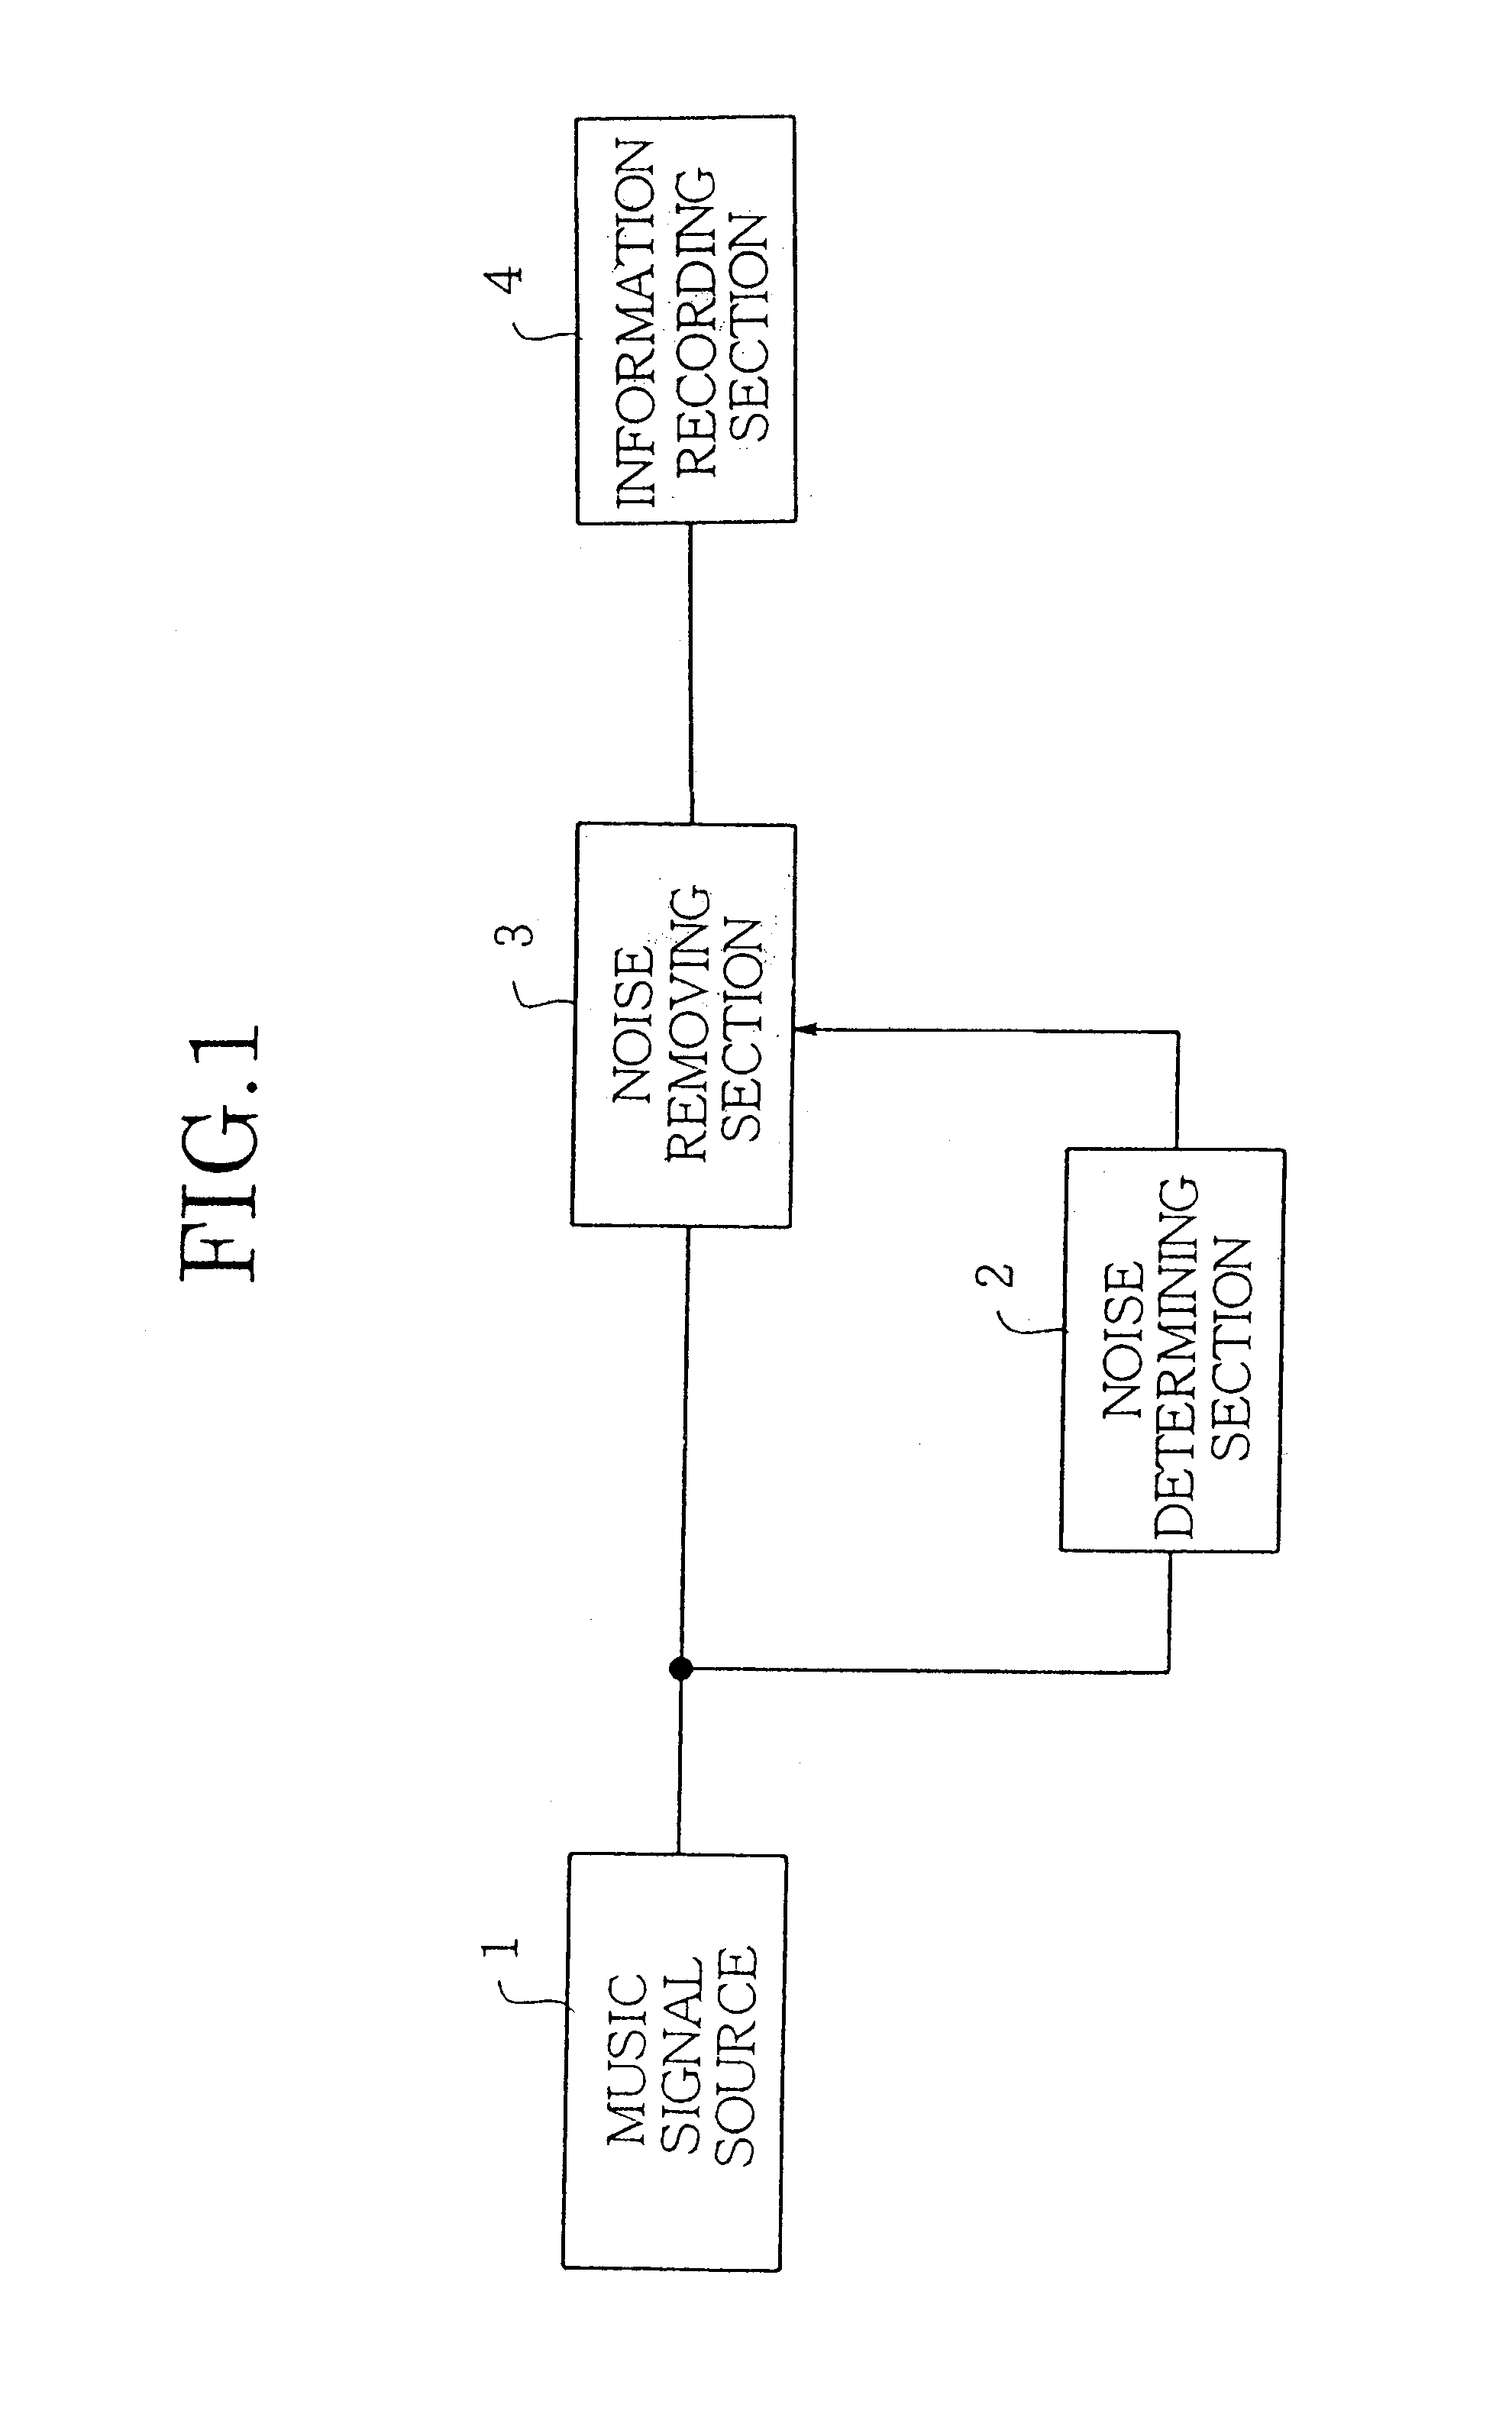 Noise reduction system for an audio system